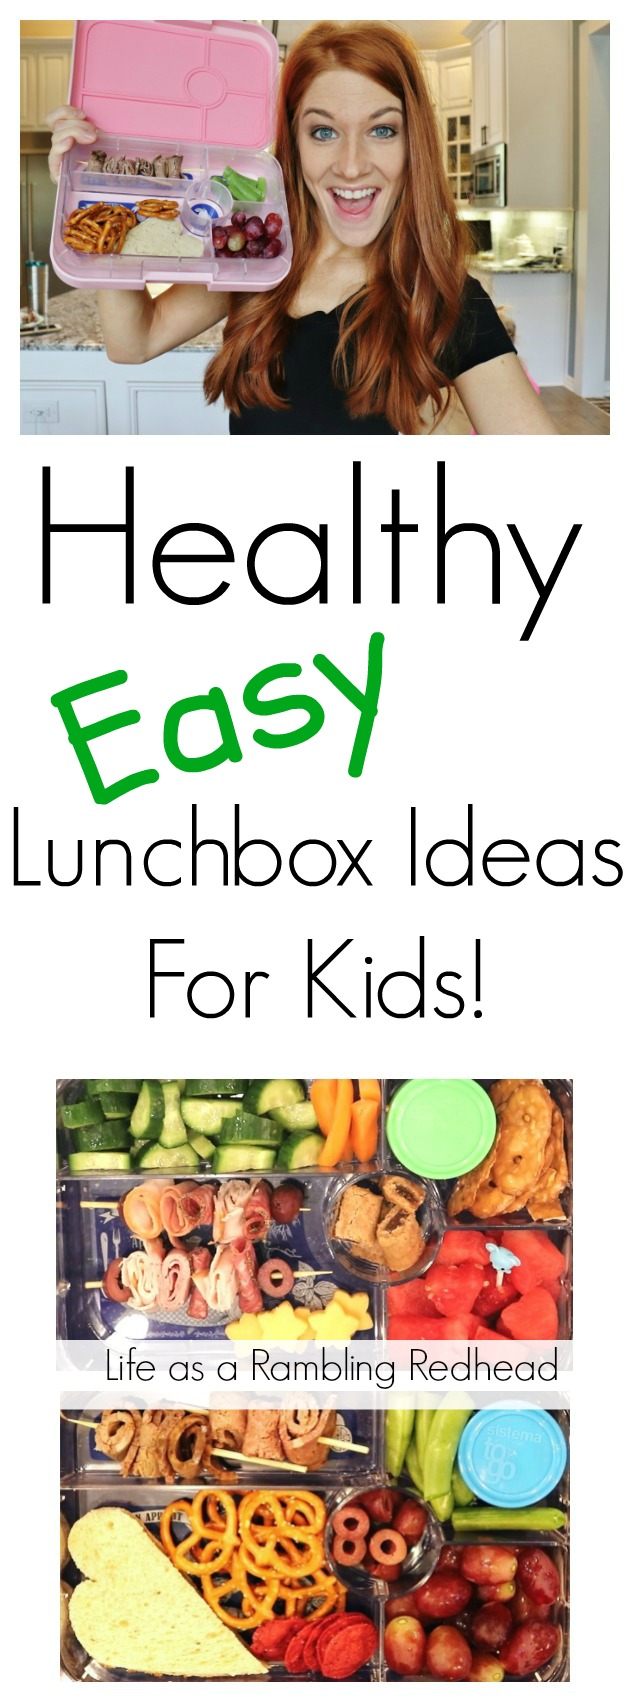 Healthy Easy Lunchbox Ideas For Kids! (Life as a Rambling Redhead)